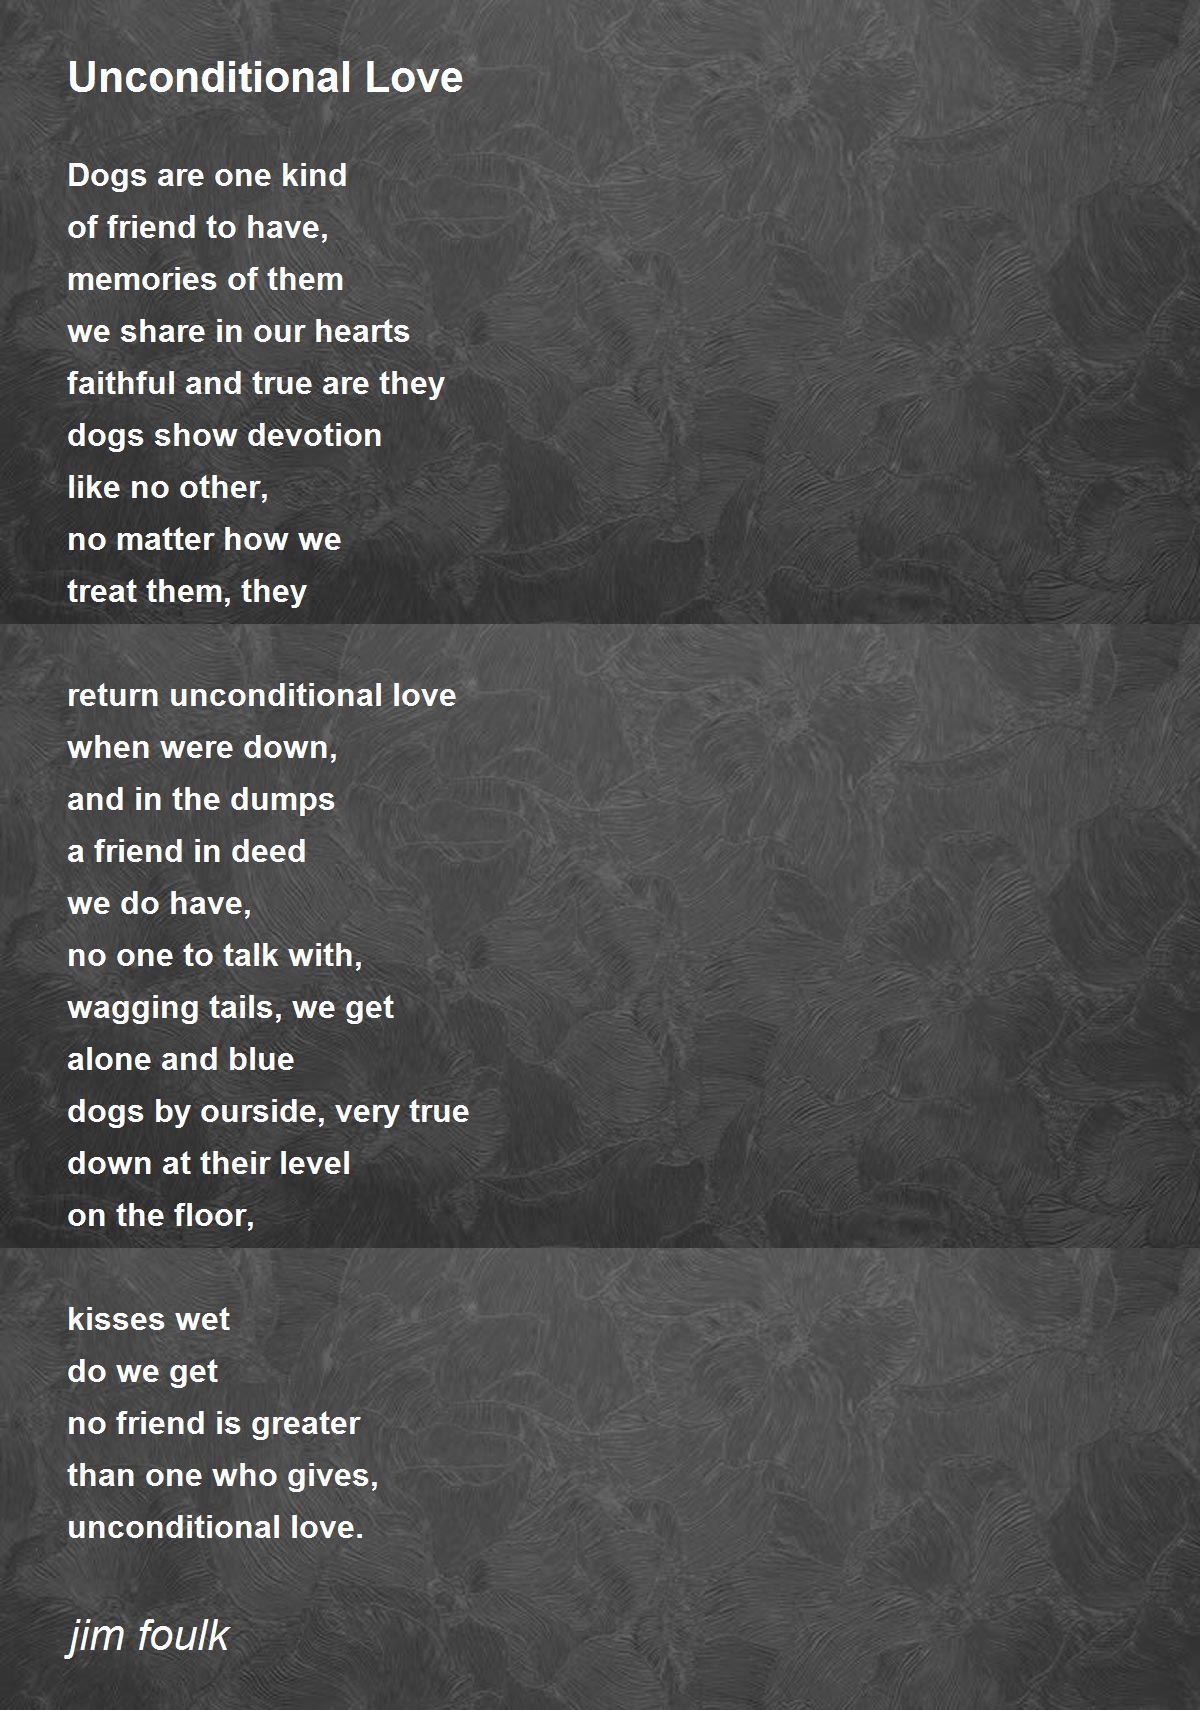 poems on unconditional love